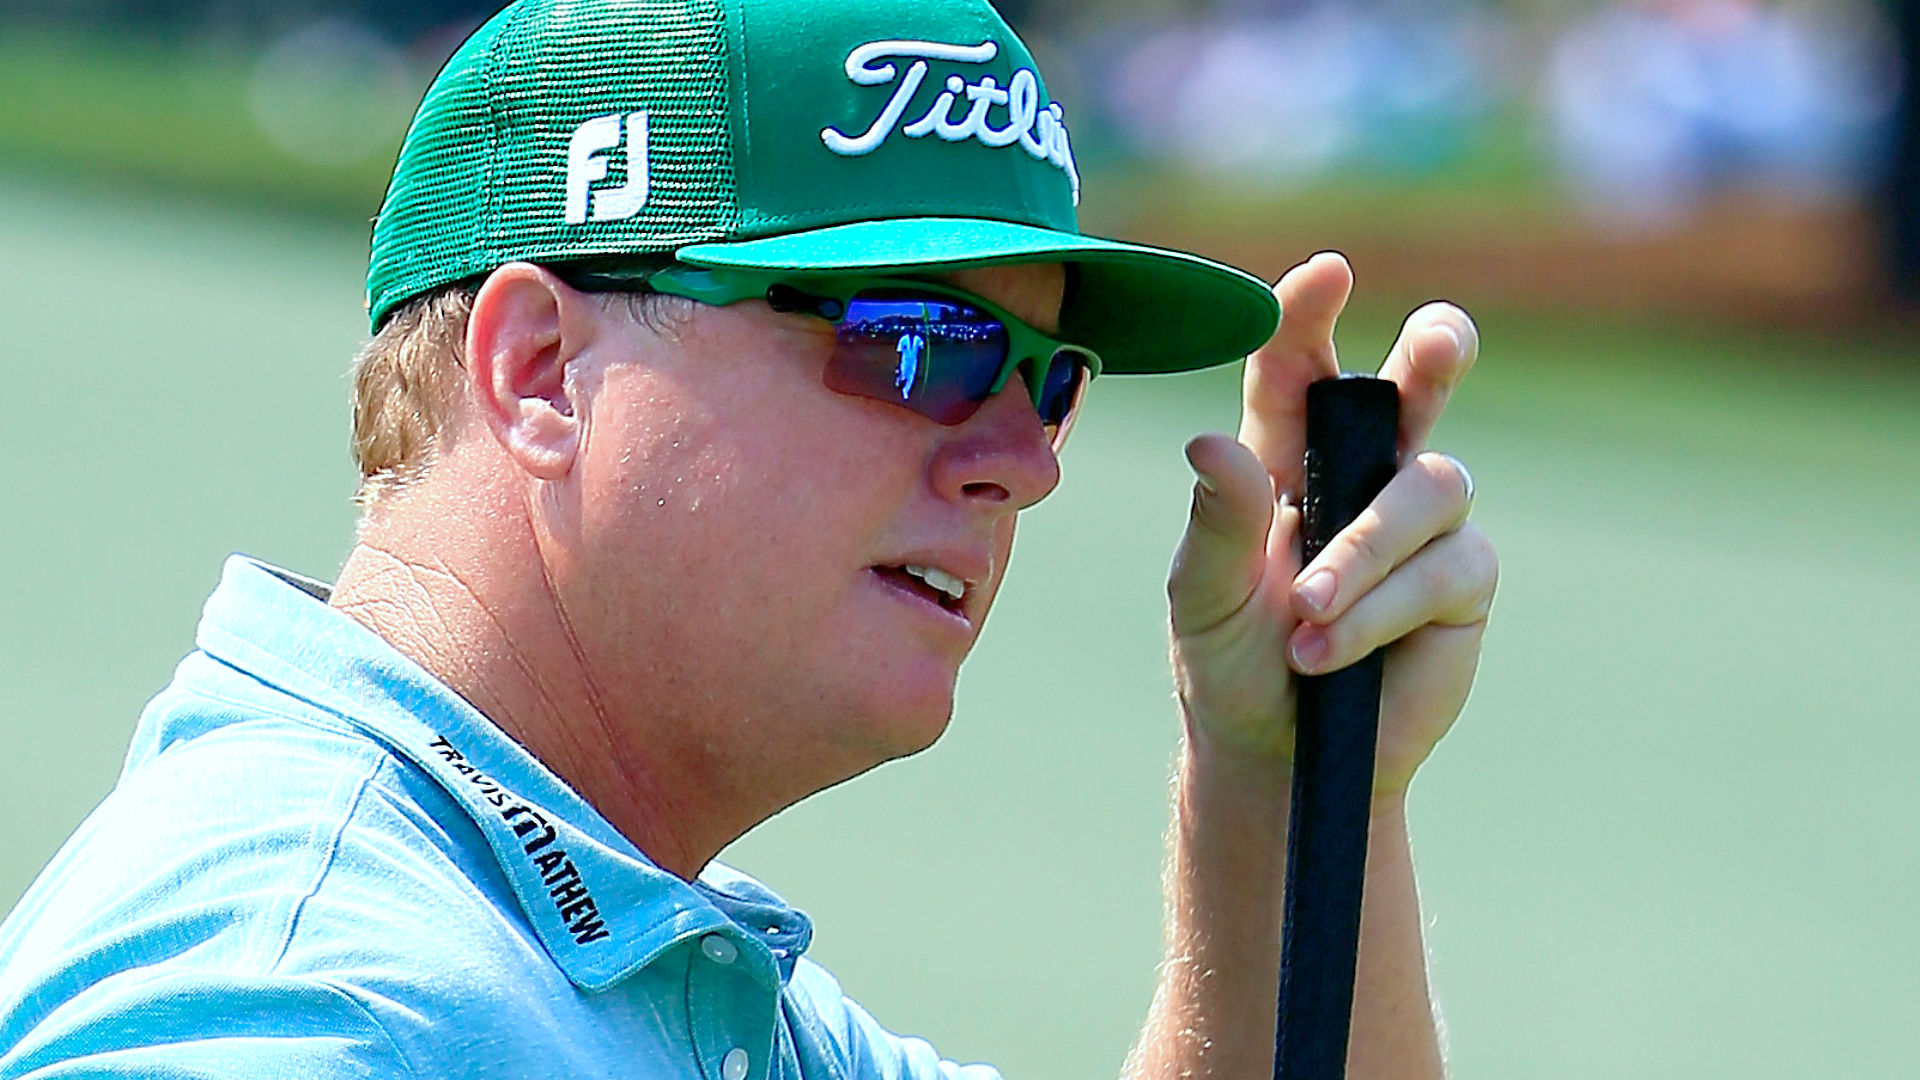 Charley Hoffman Is Hot In Houston -- Shoots 64